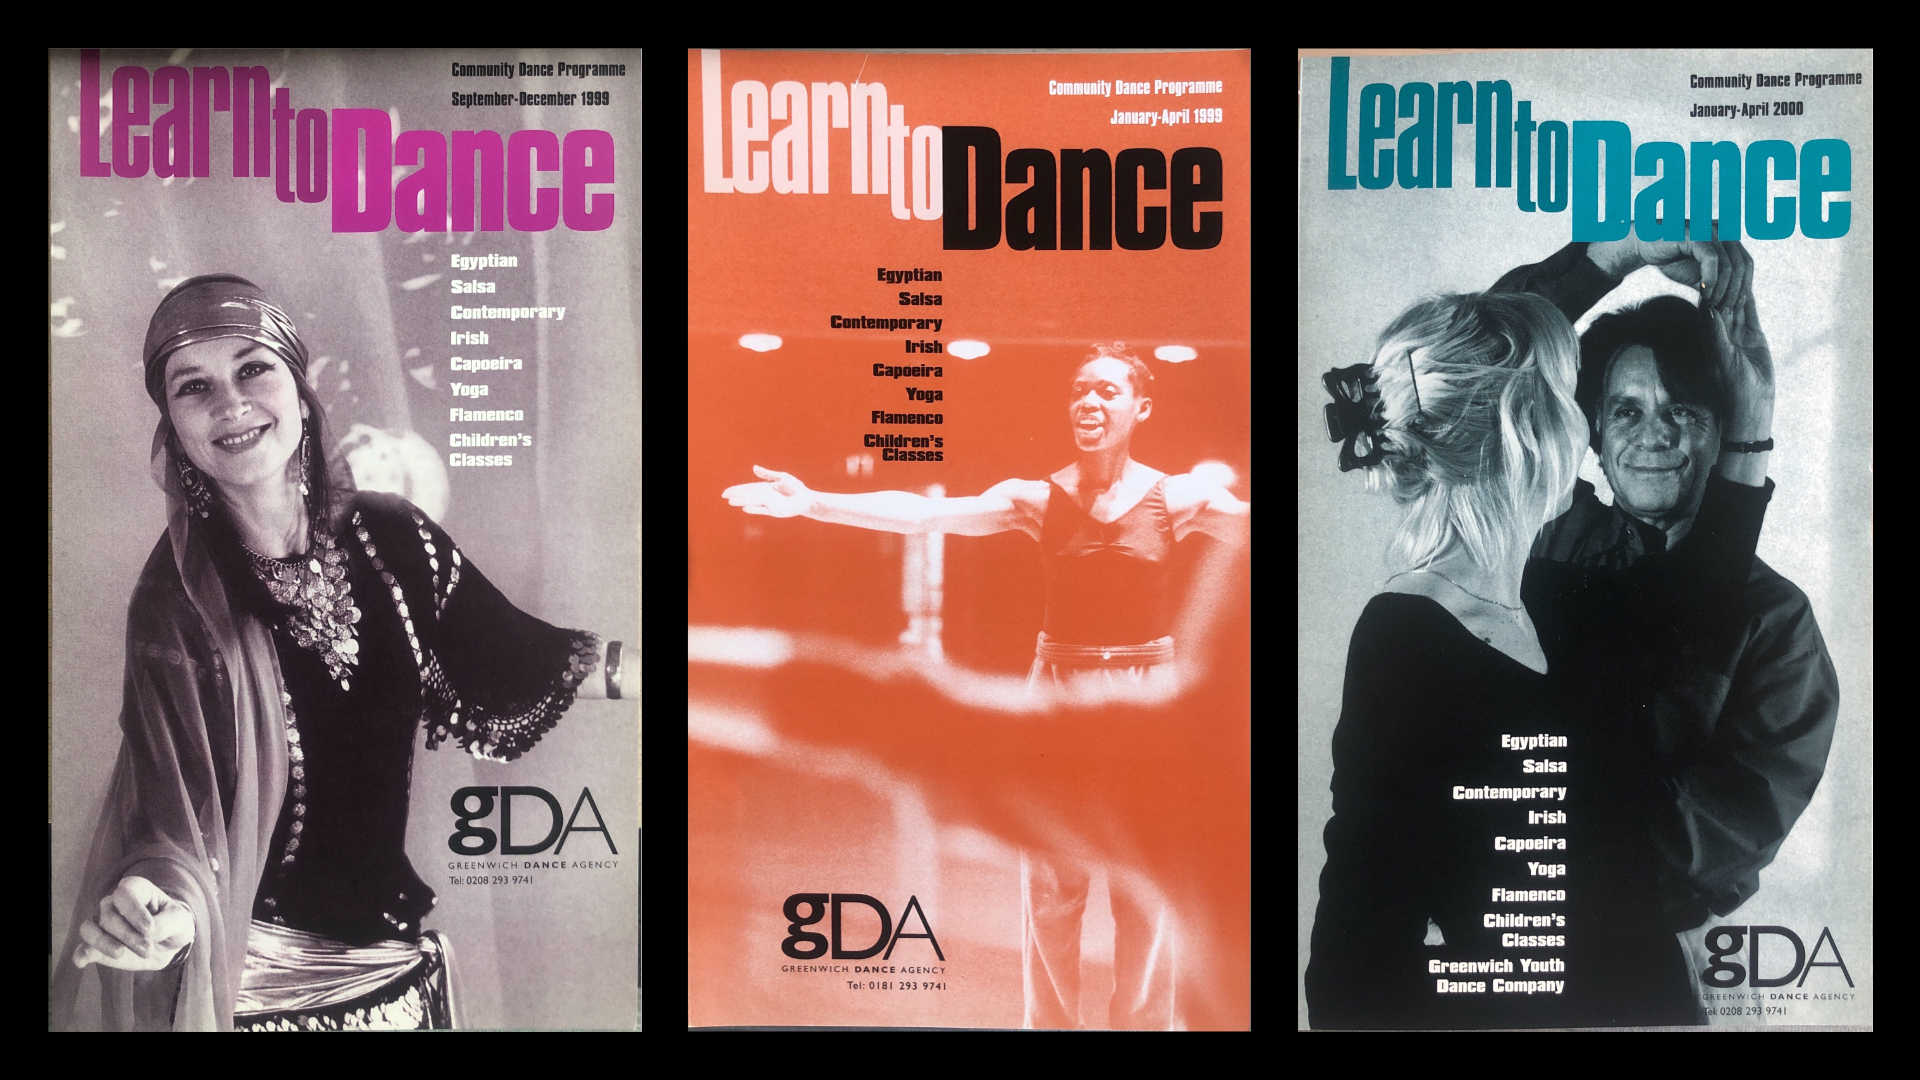 30 years in pictures: 1999-2000. Learn to Dance. Three brochures from the late 1990s